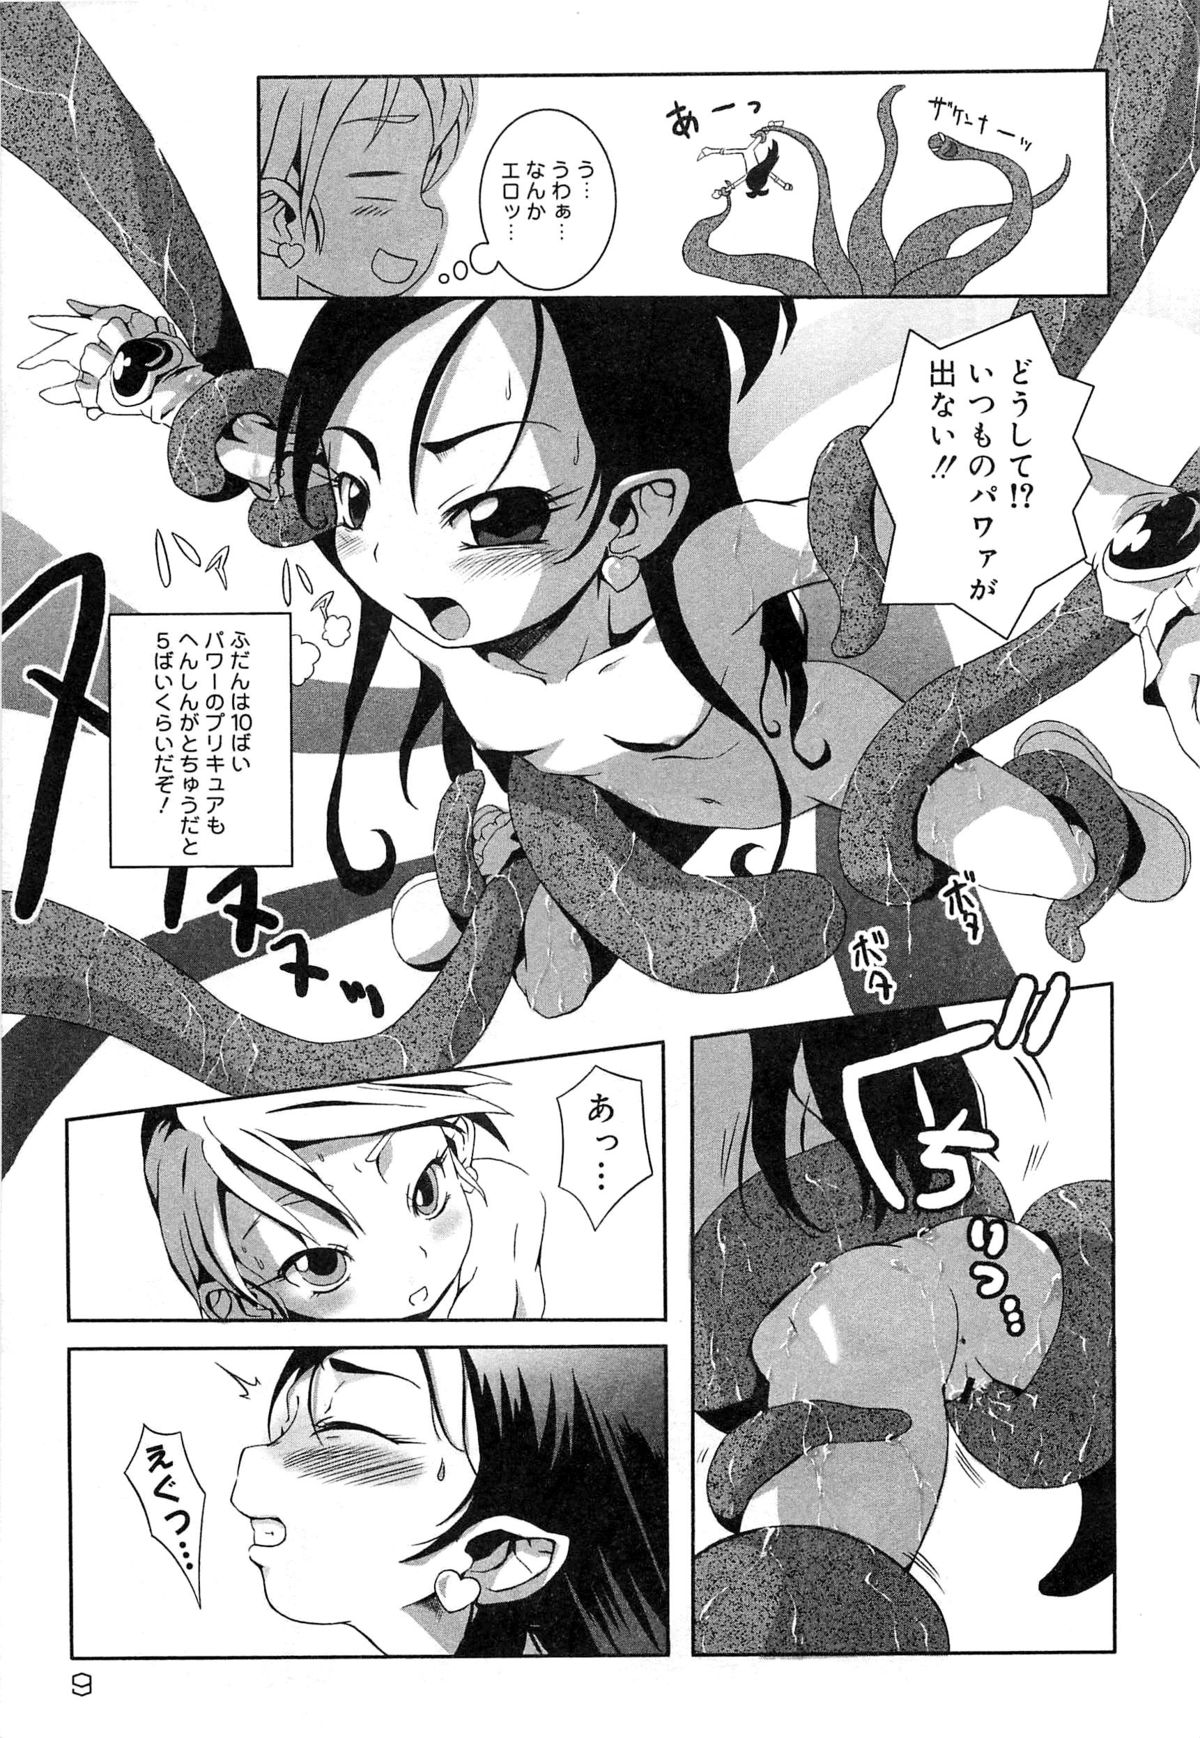 [Anthology] Cure Cure Battle Precure Eroparo page 14 full